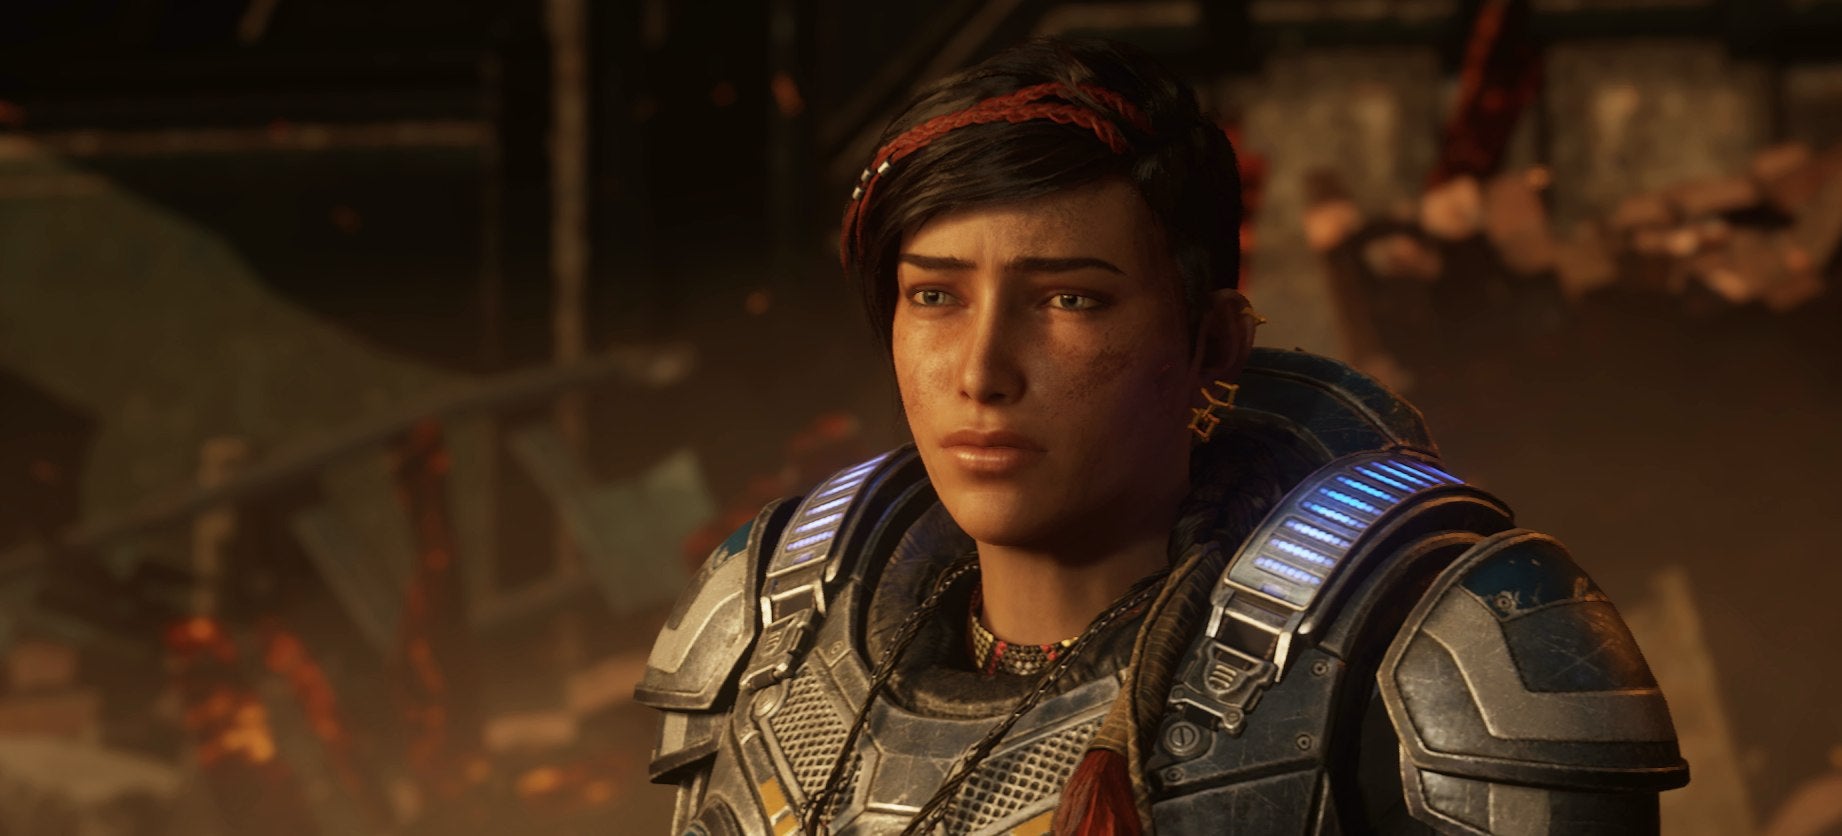 Gears 5 Characters Guide - Who Are the Characters in Gears 5? | VG247